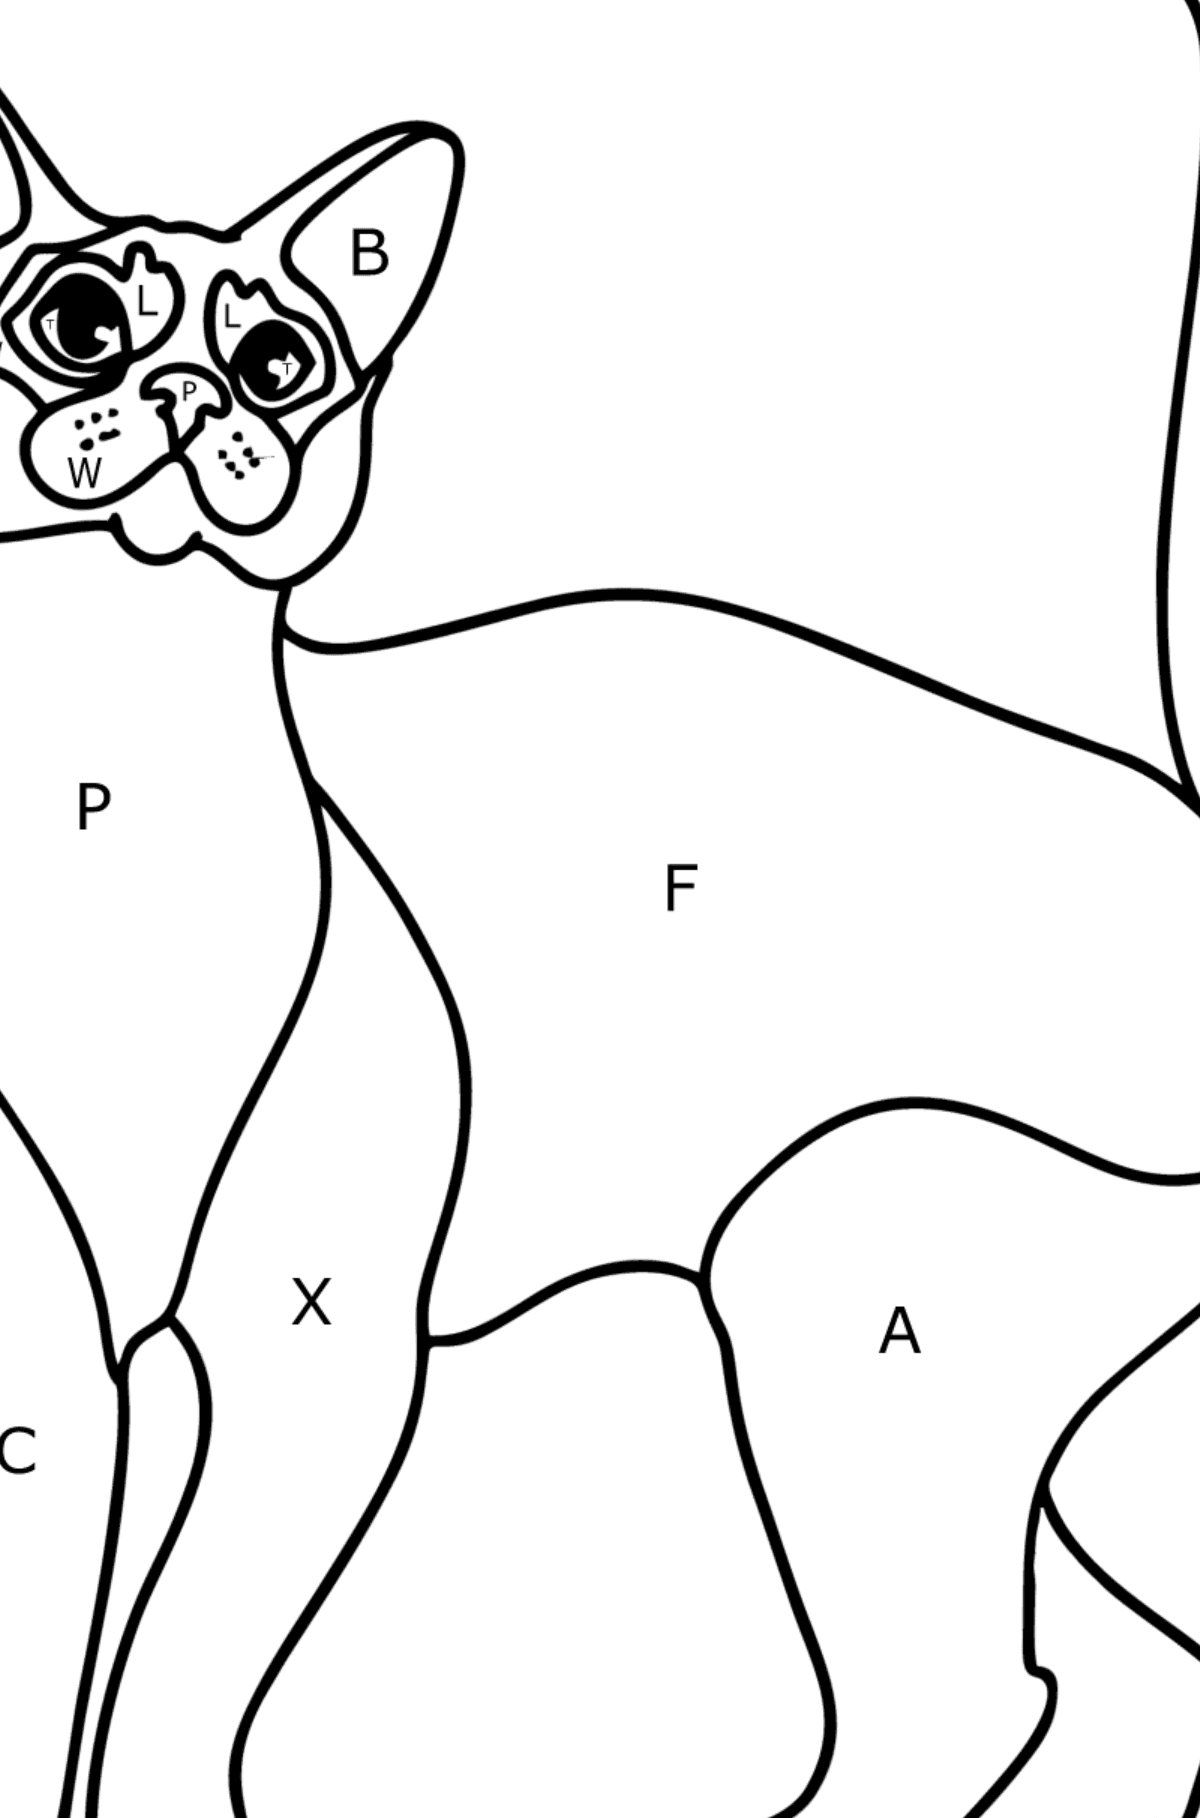 Abyssinian Cat coloring page - Coloring by Letters for Kids